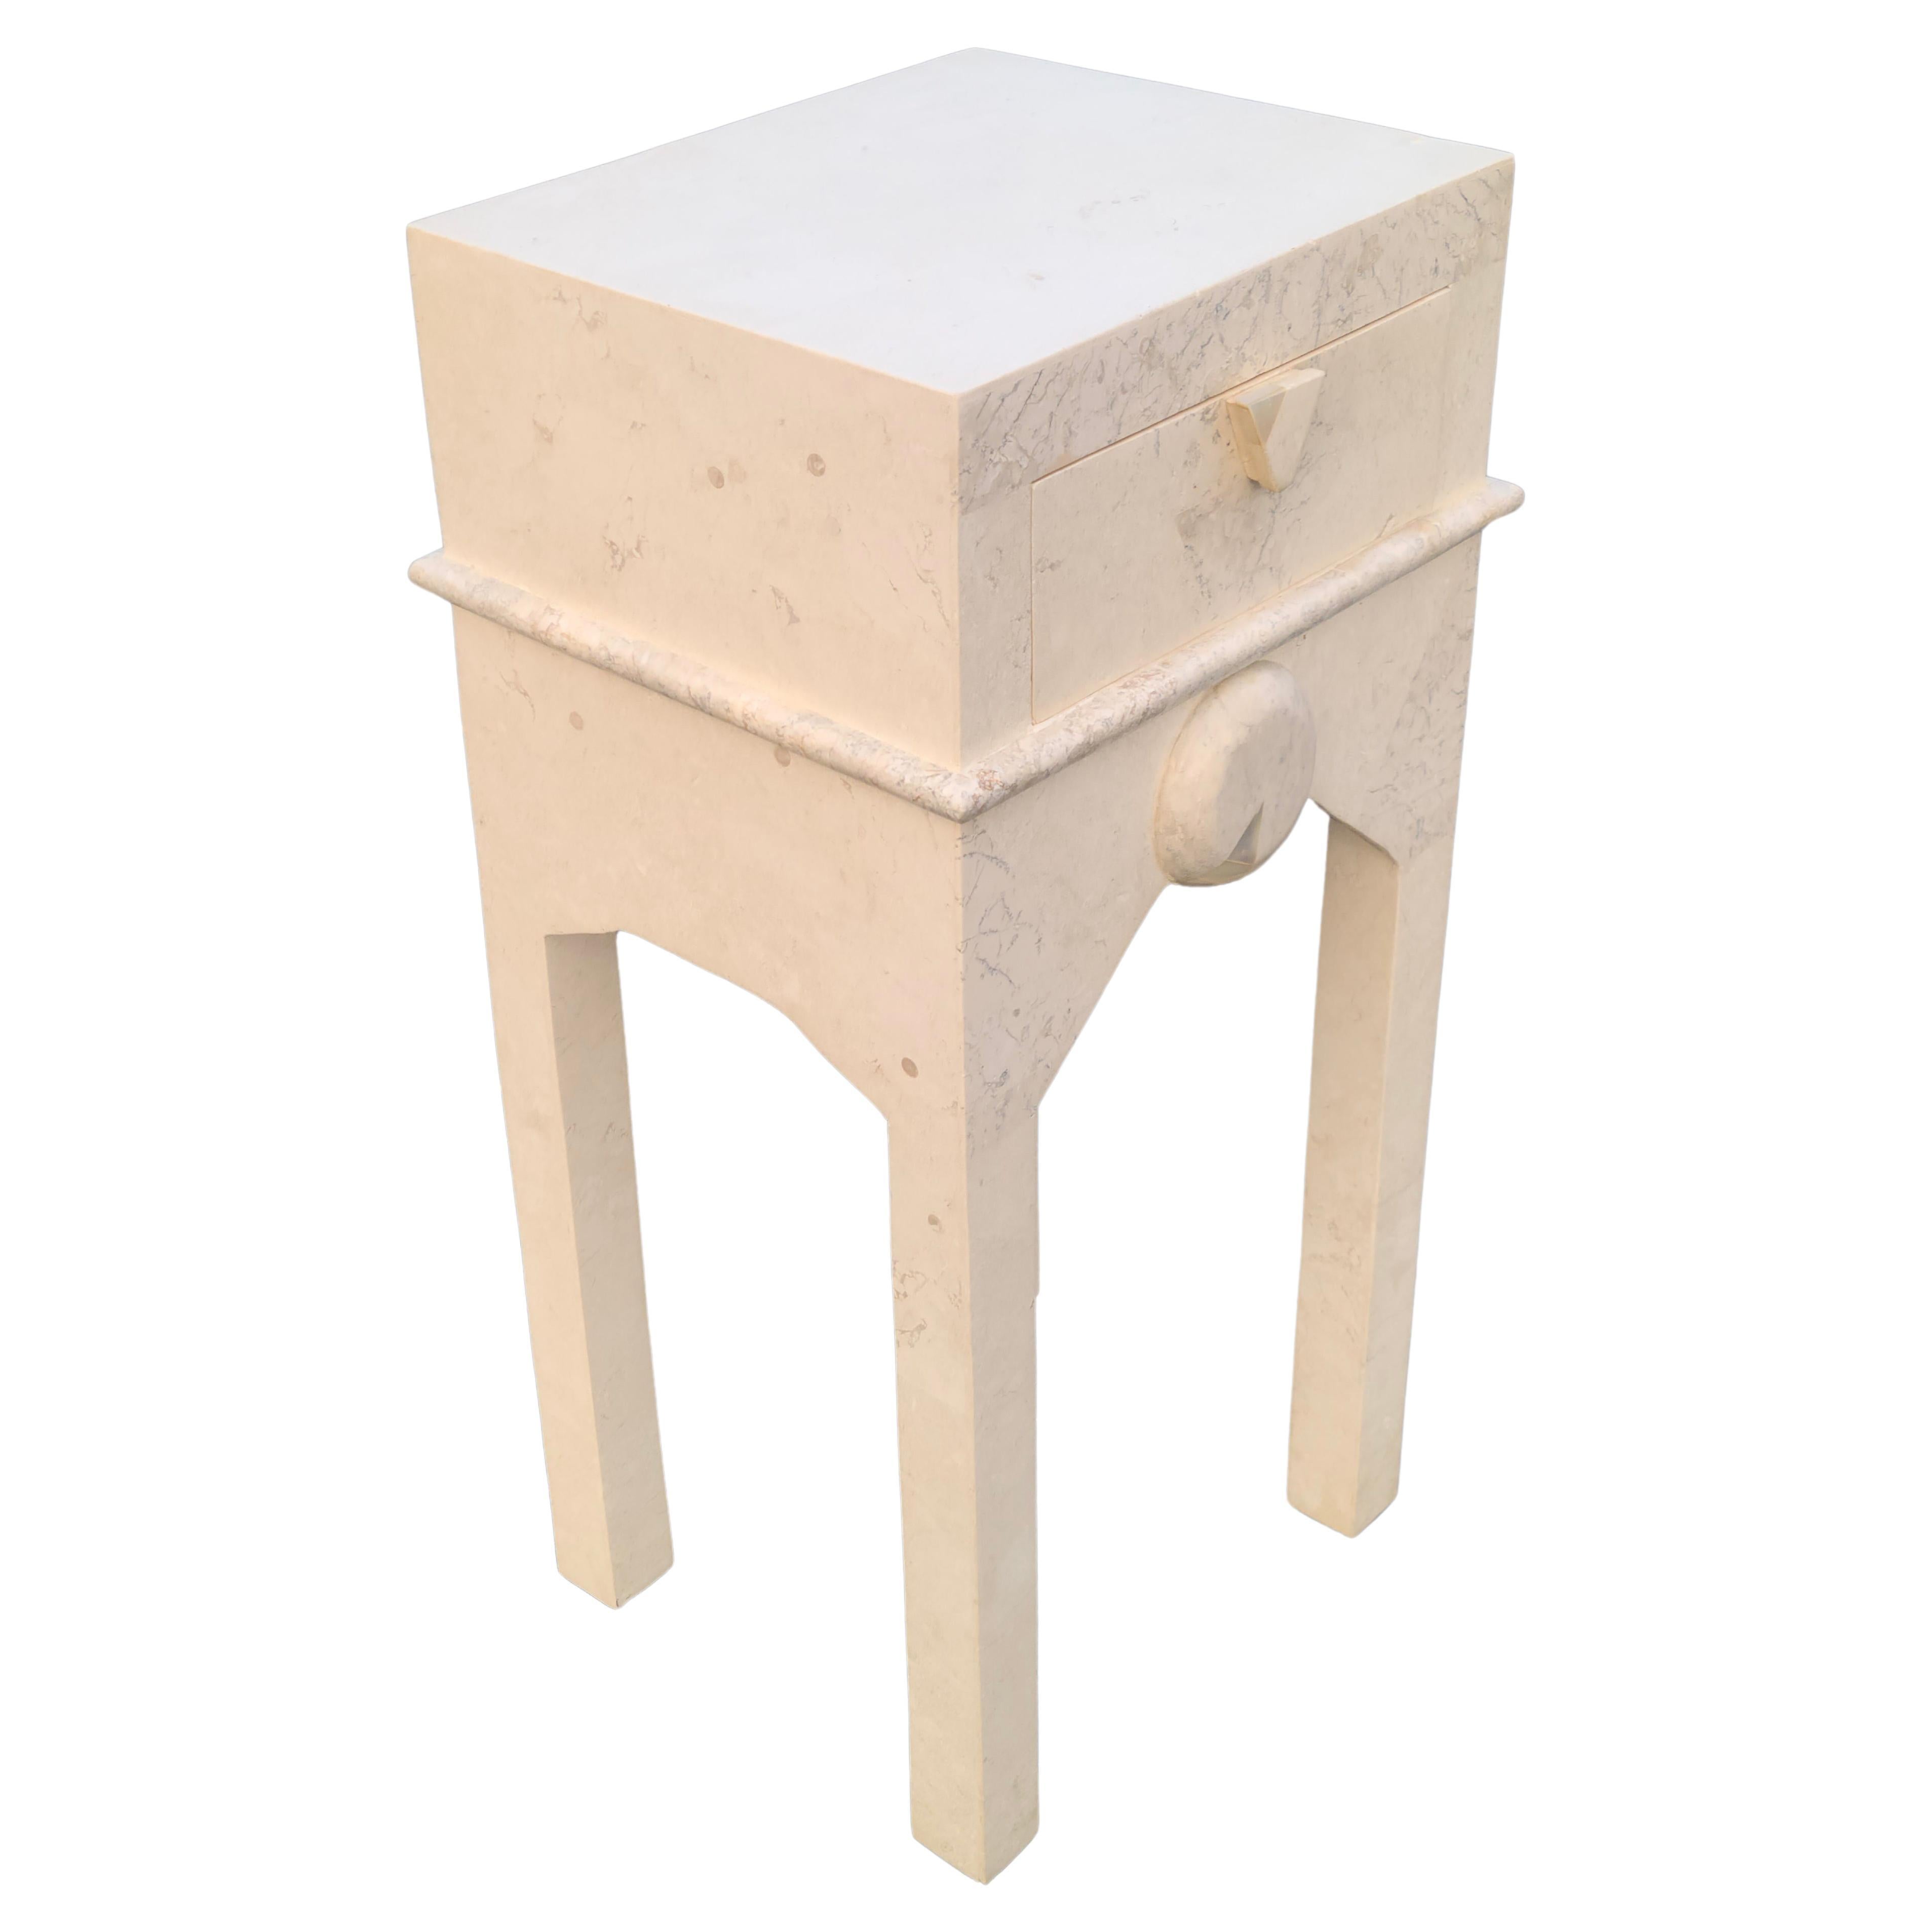 Late 20th Century Maitland Smith Tessellated Stone Side Table For Sale